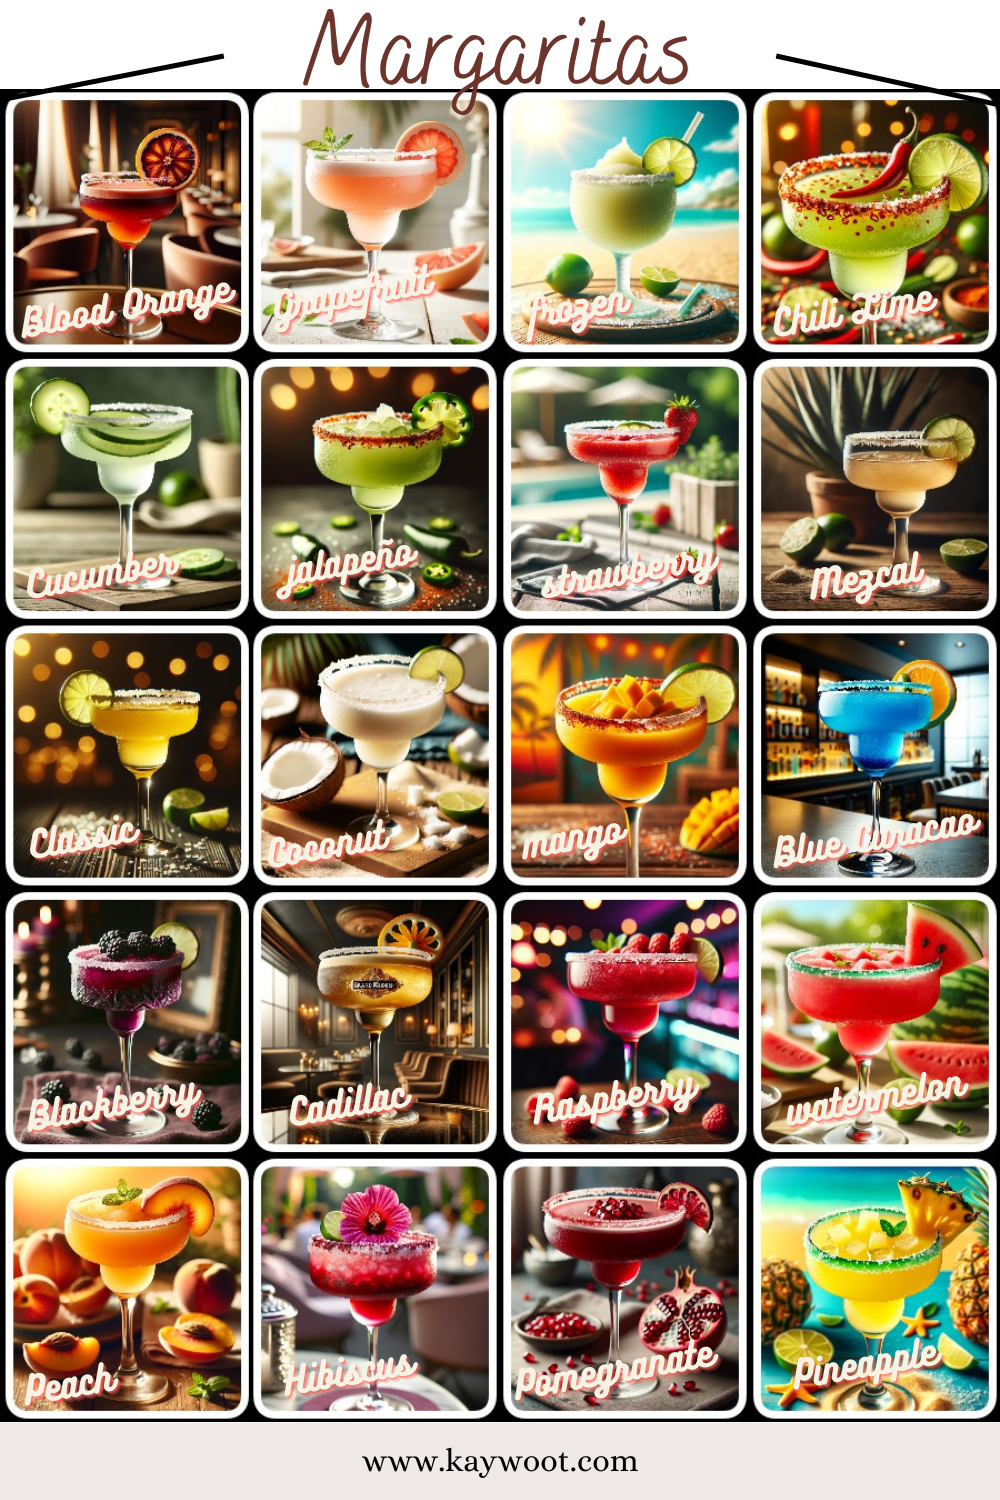 20 Types of Margaritas: Which One Is Your Favorite?